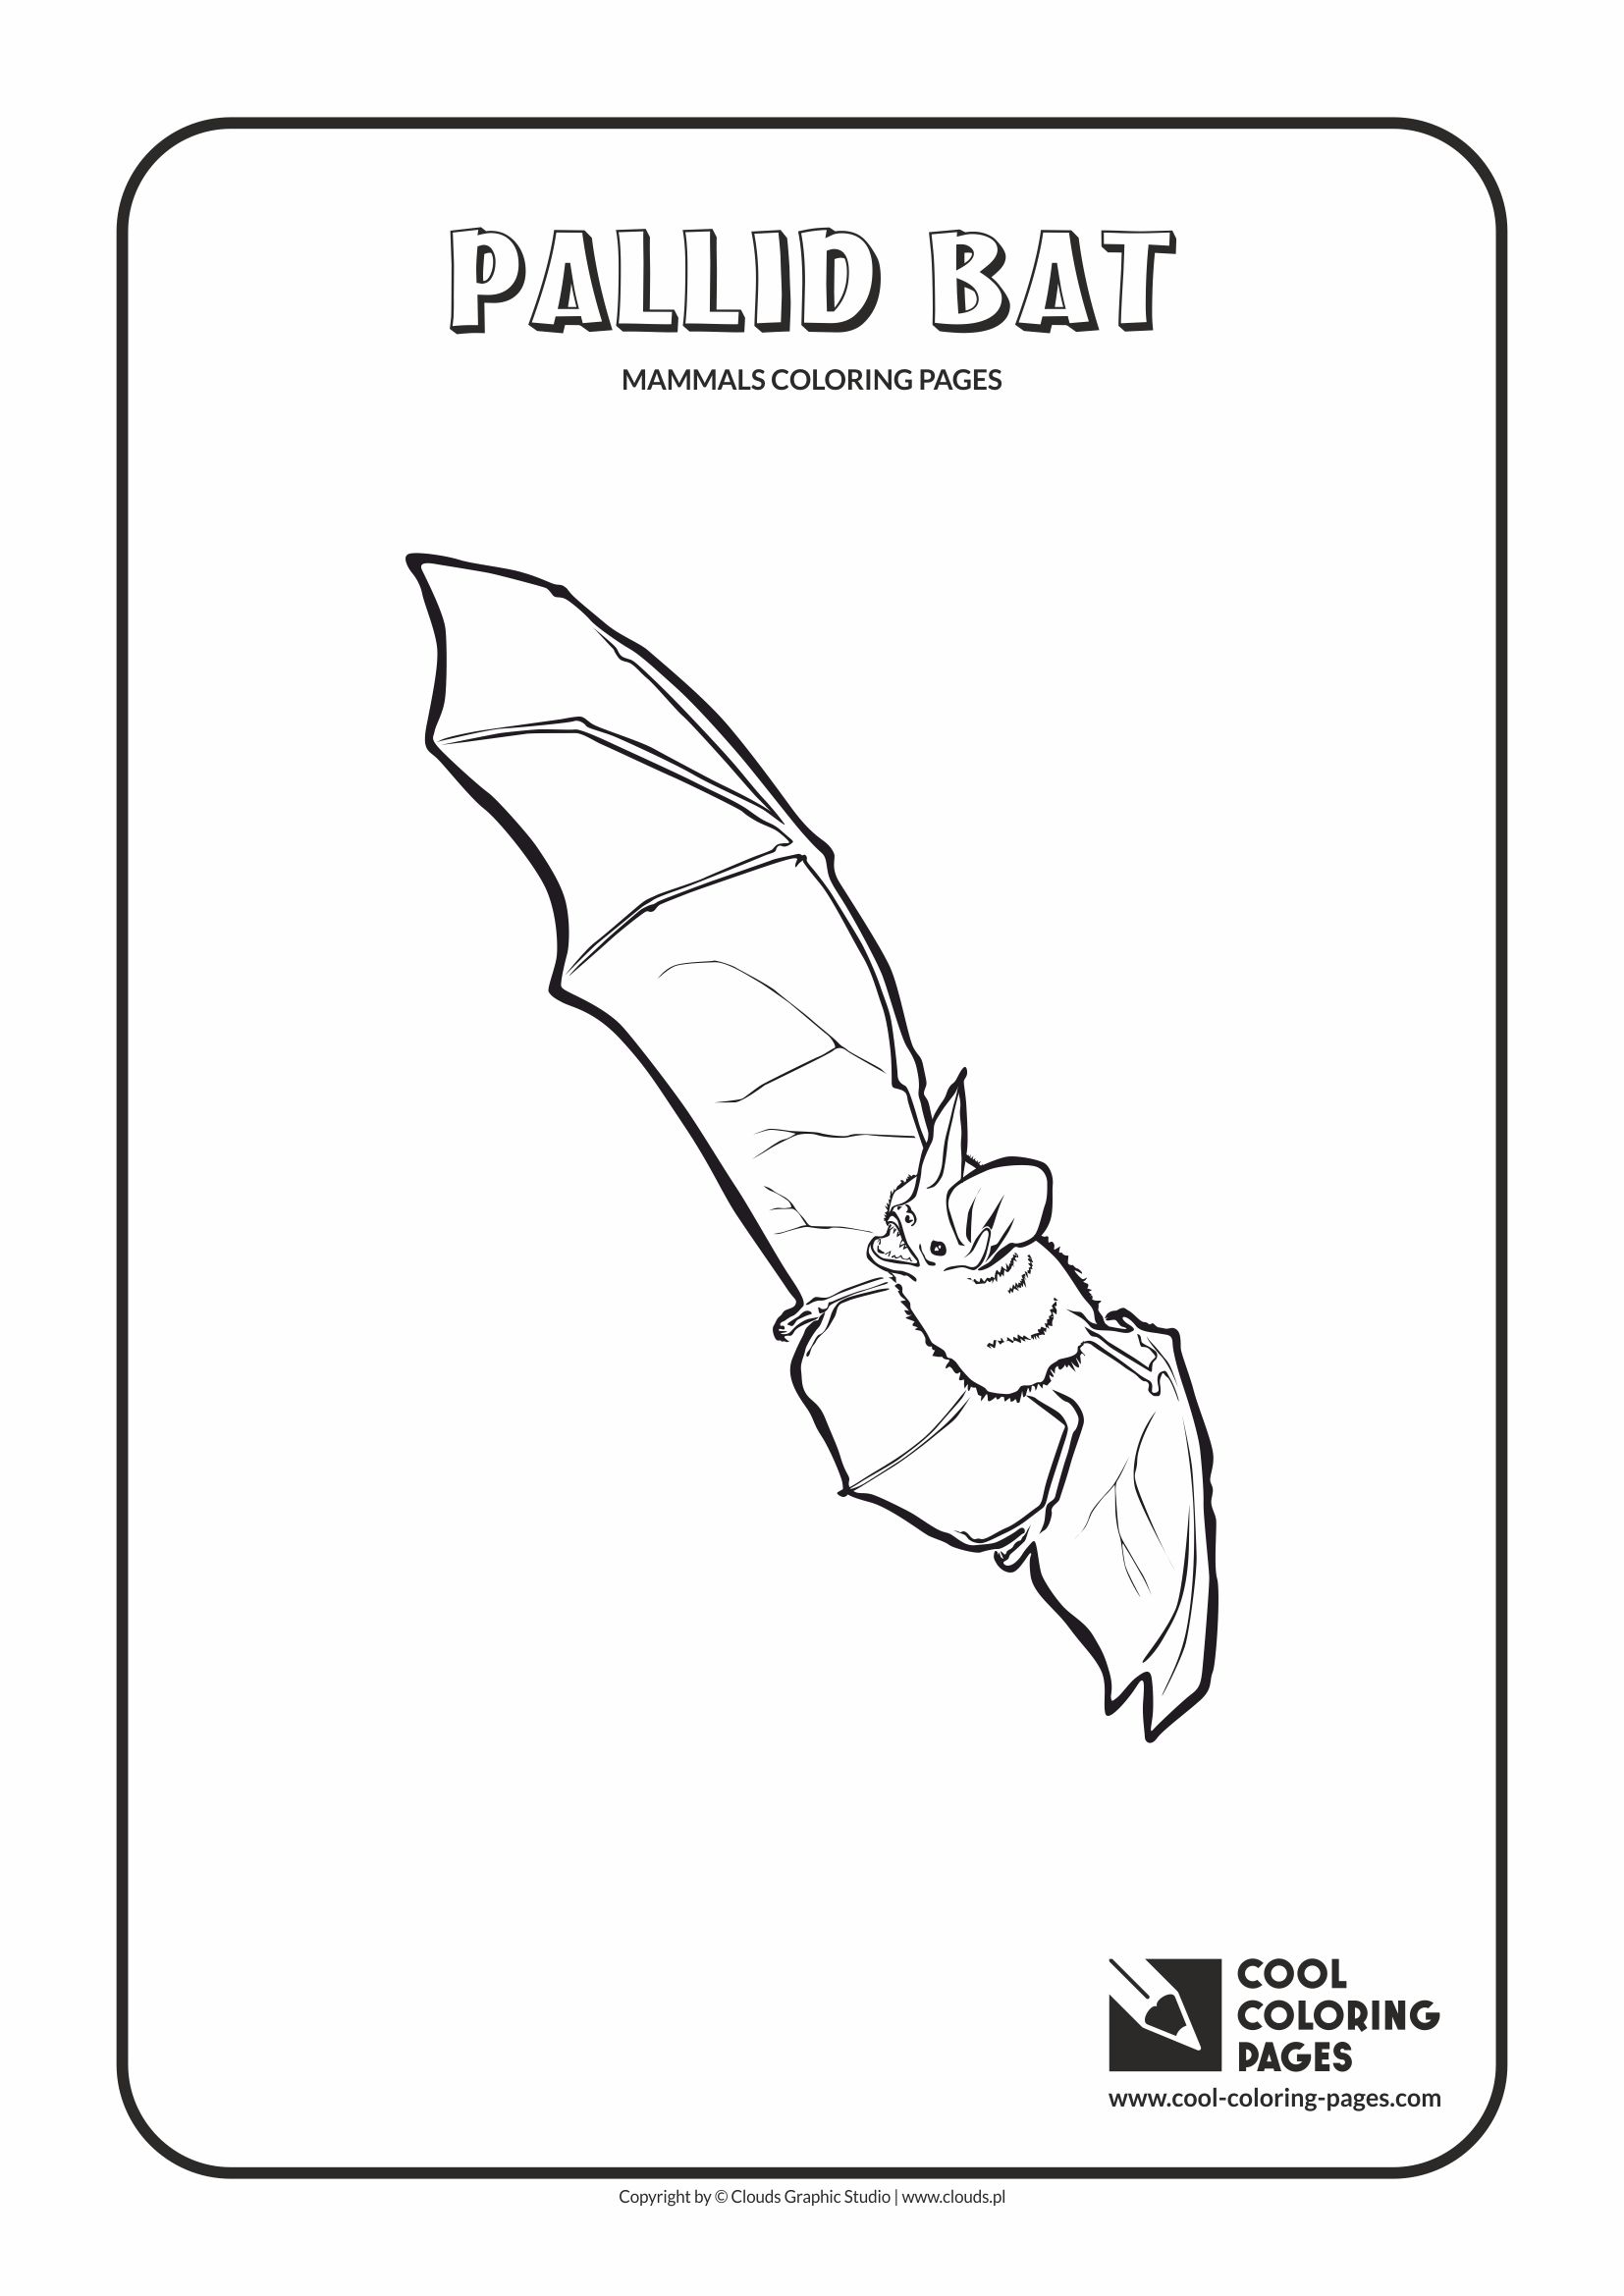 Cool Coloring Pages - Animals / Pallid bat / Coloring page with pallid bat